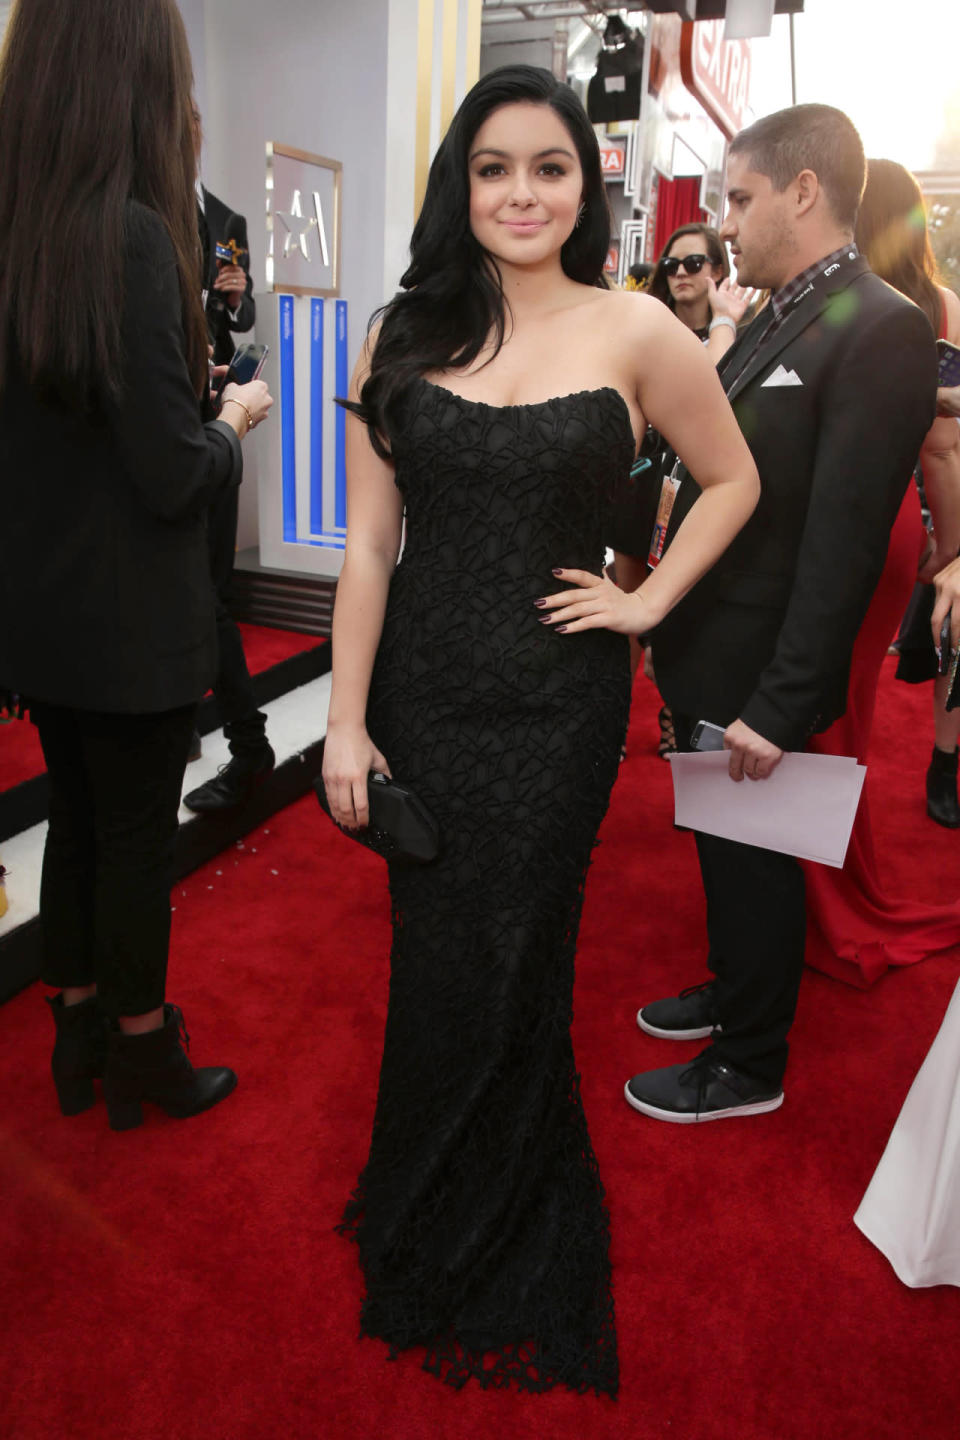 Ariel Winter in a Romona Keveza at the 22nd Annual Screen Actors Guild Awards at The Shrine Auditorium on January 30, 2016 in Los Angeles, California.